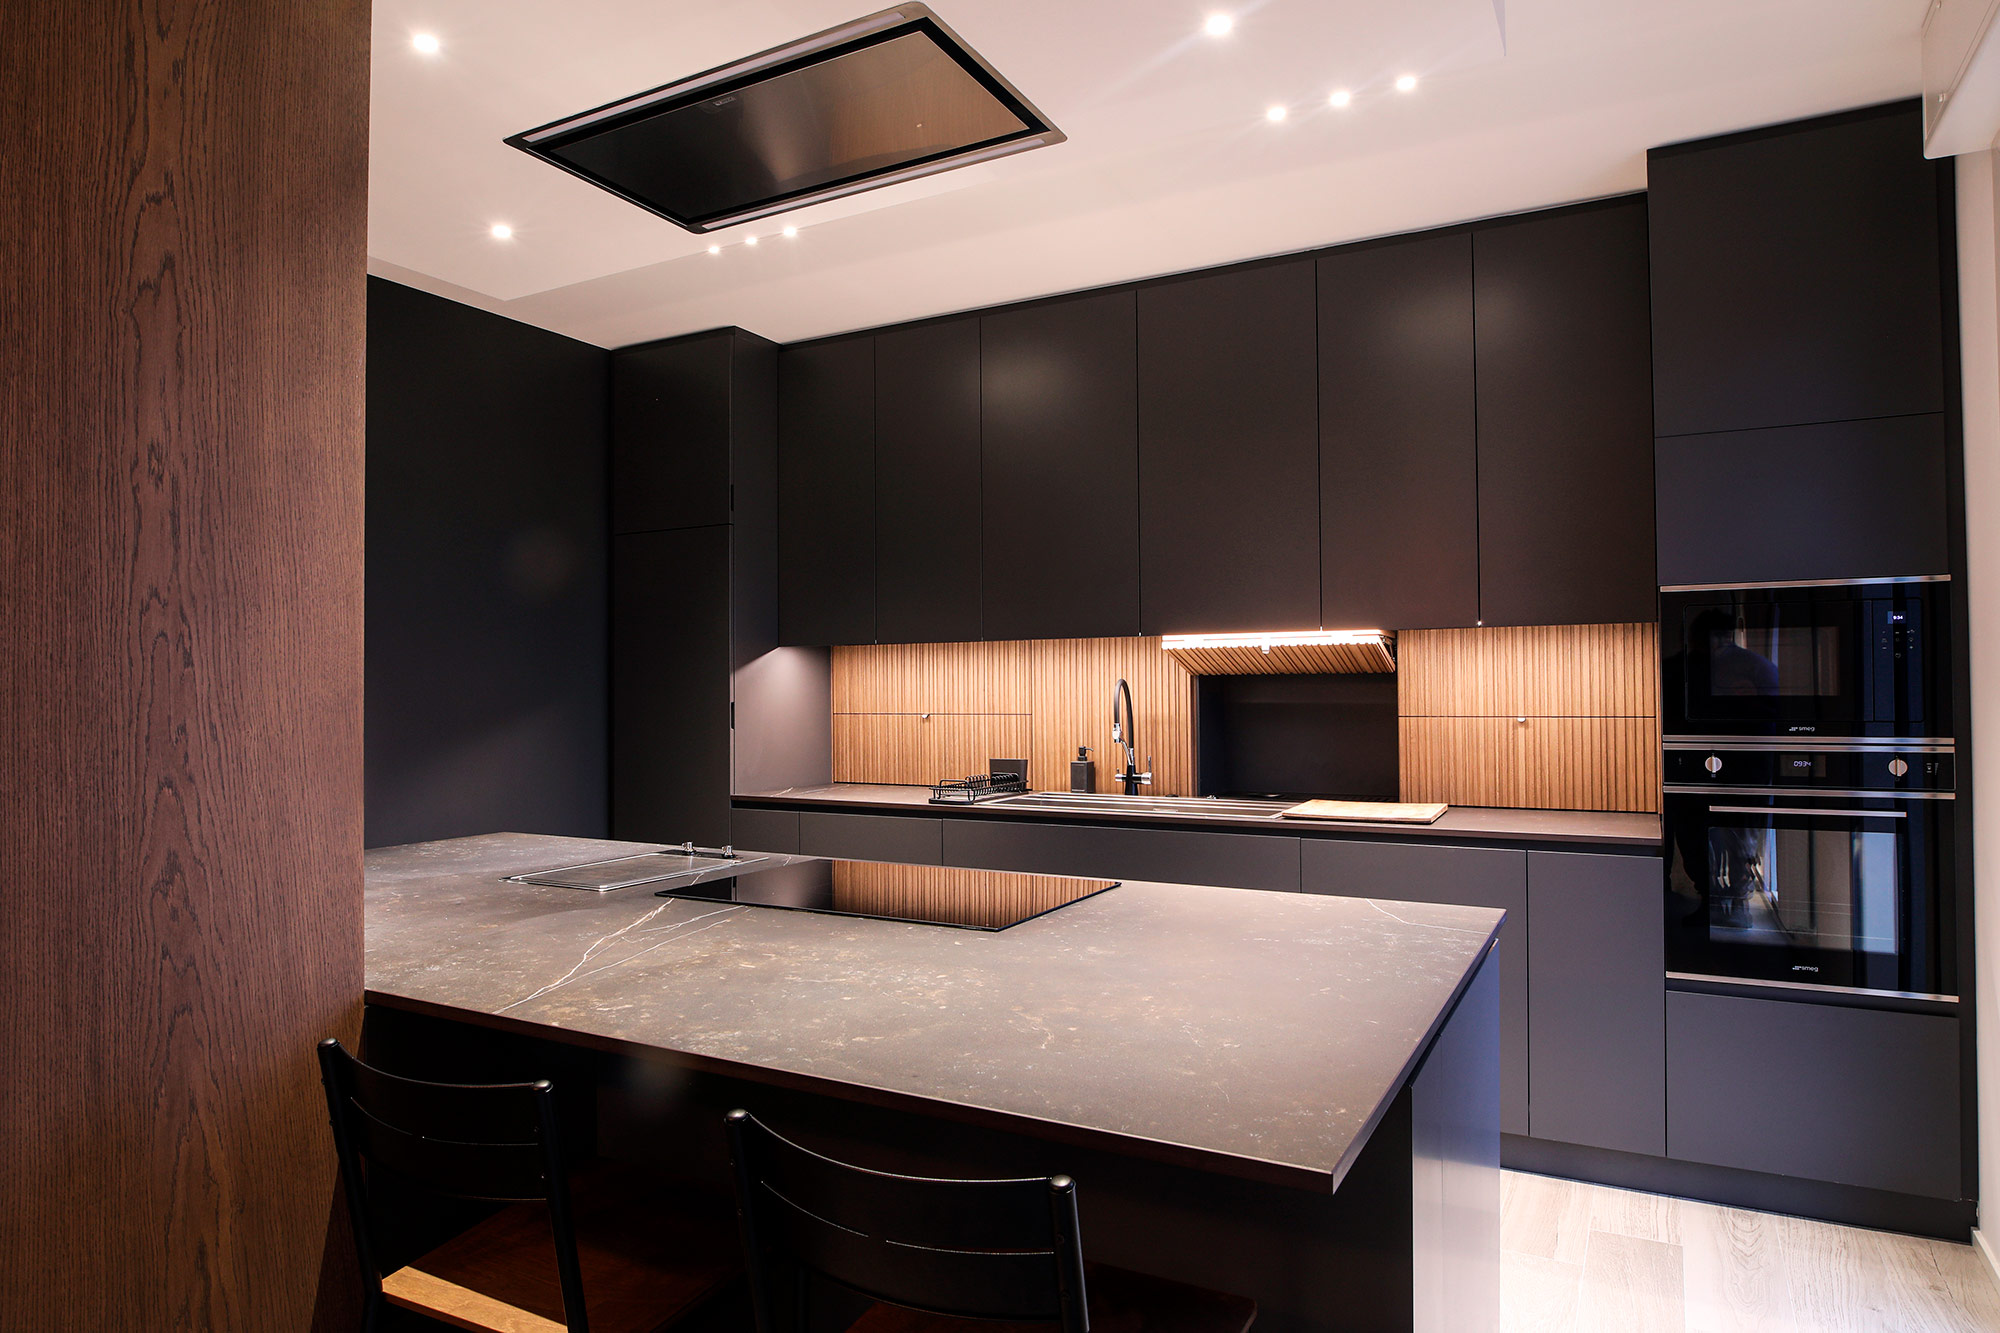 Image of Studio A Side Cucina GRC 7 in A modern cuisine that looks to tradition - Cosentino